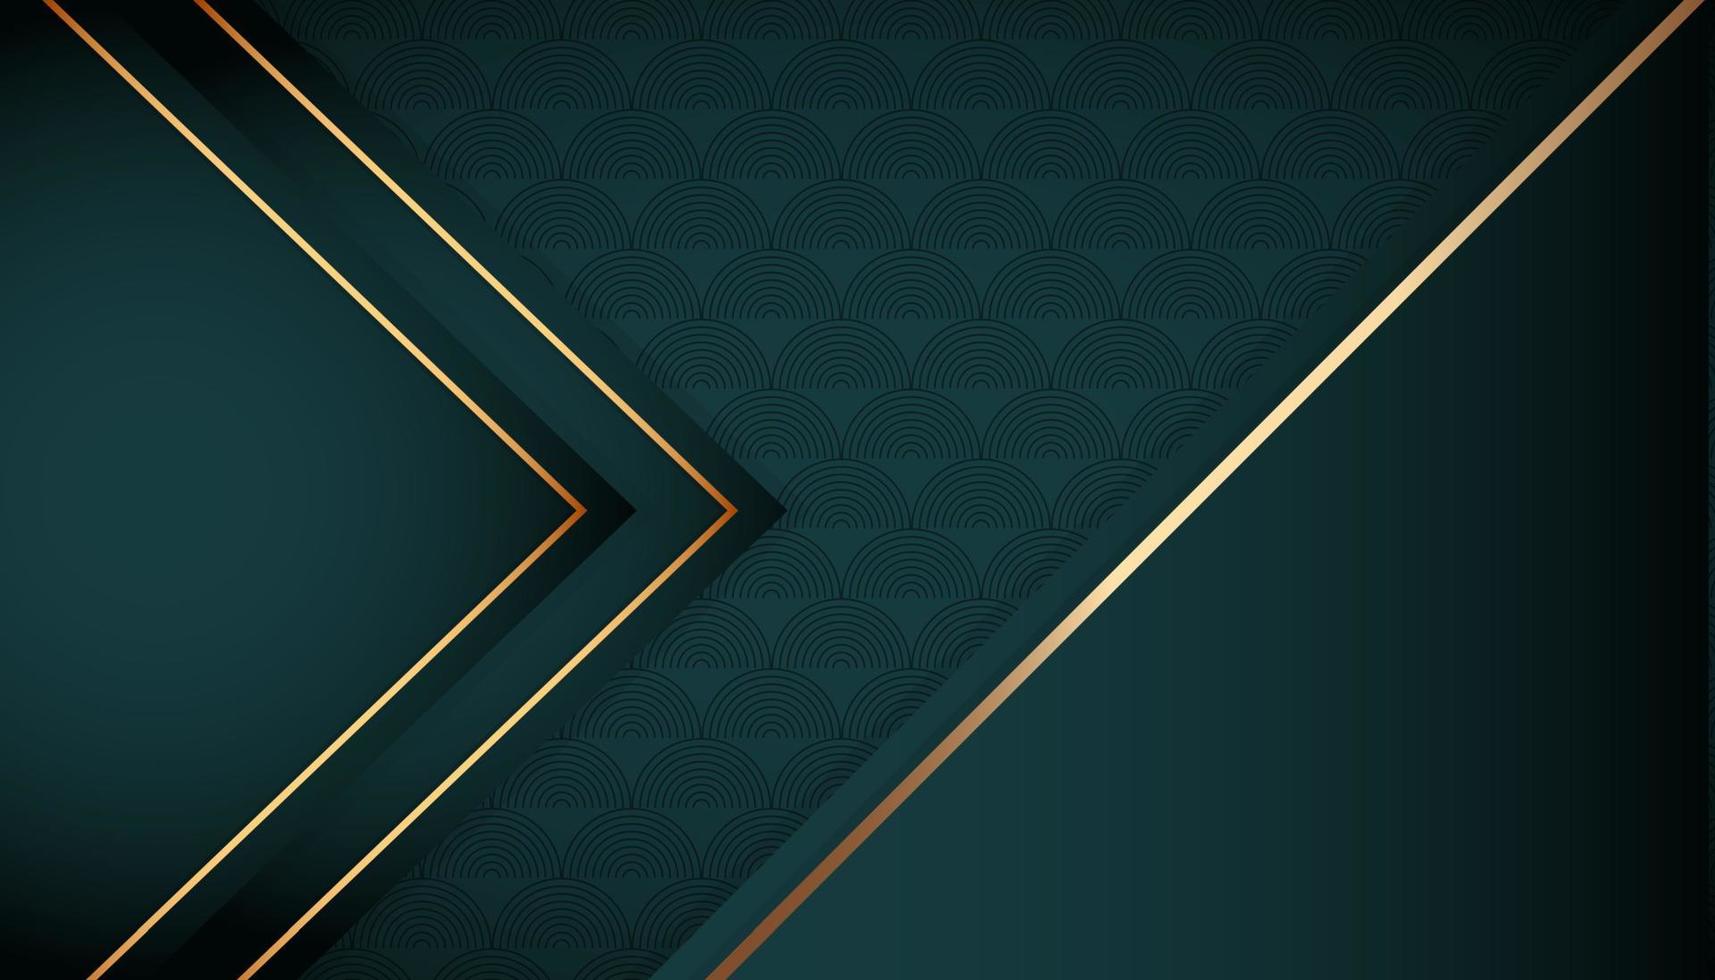 Modern luxury abstract background with glowing golden line elements. Beautiful geometric shapes on luxury green gradient background. vector